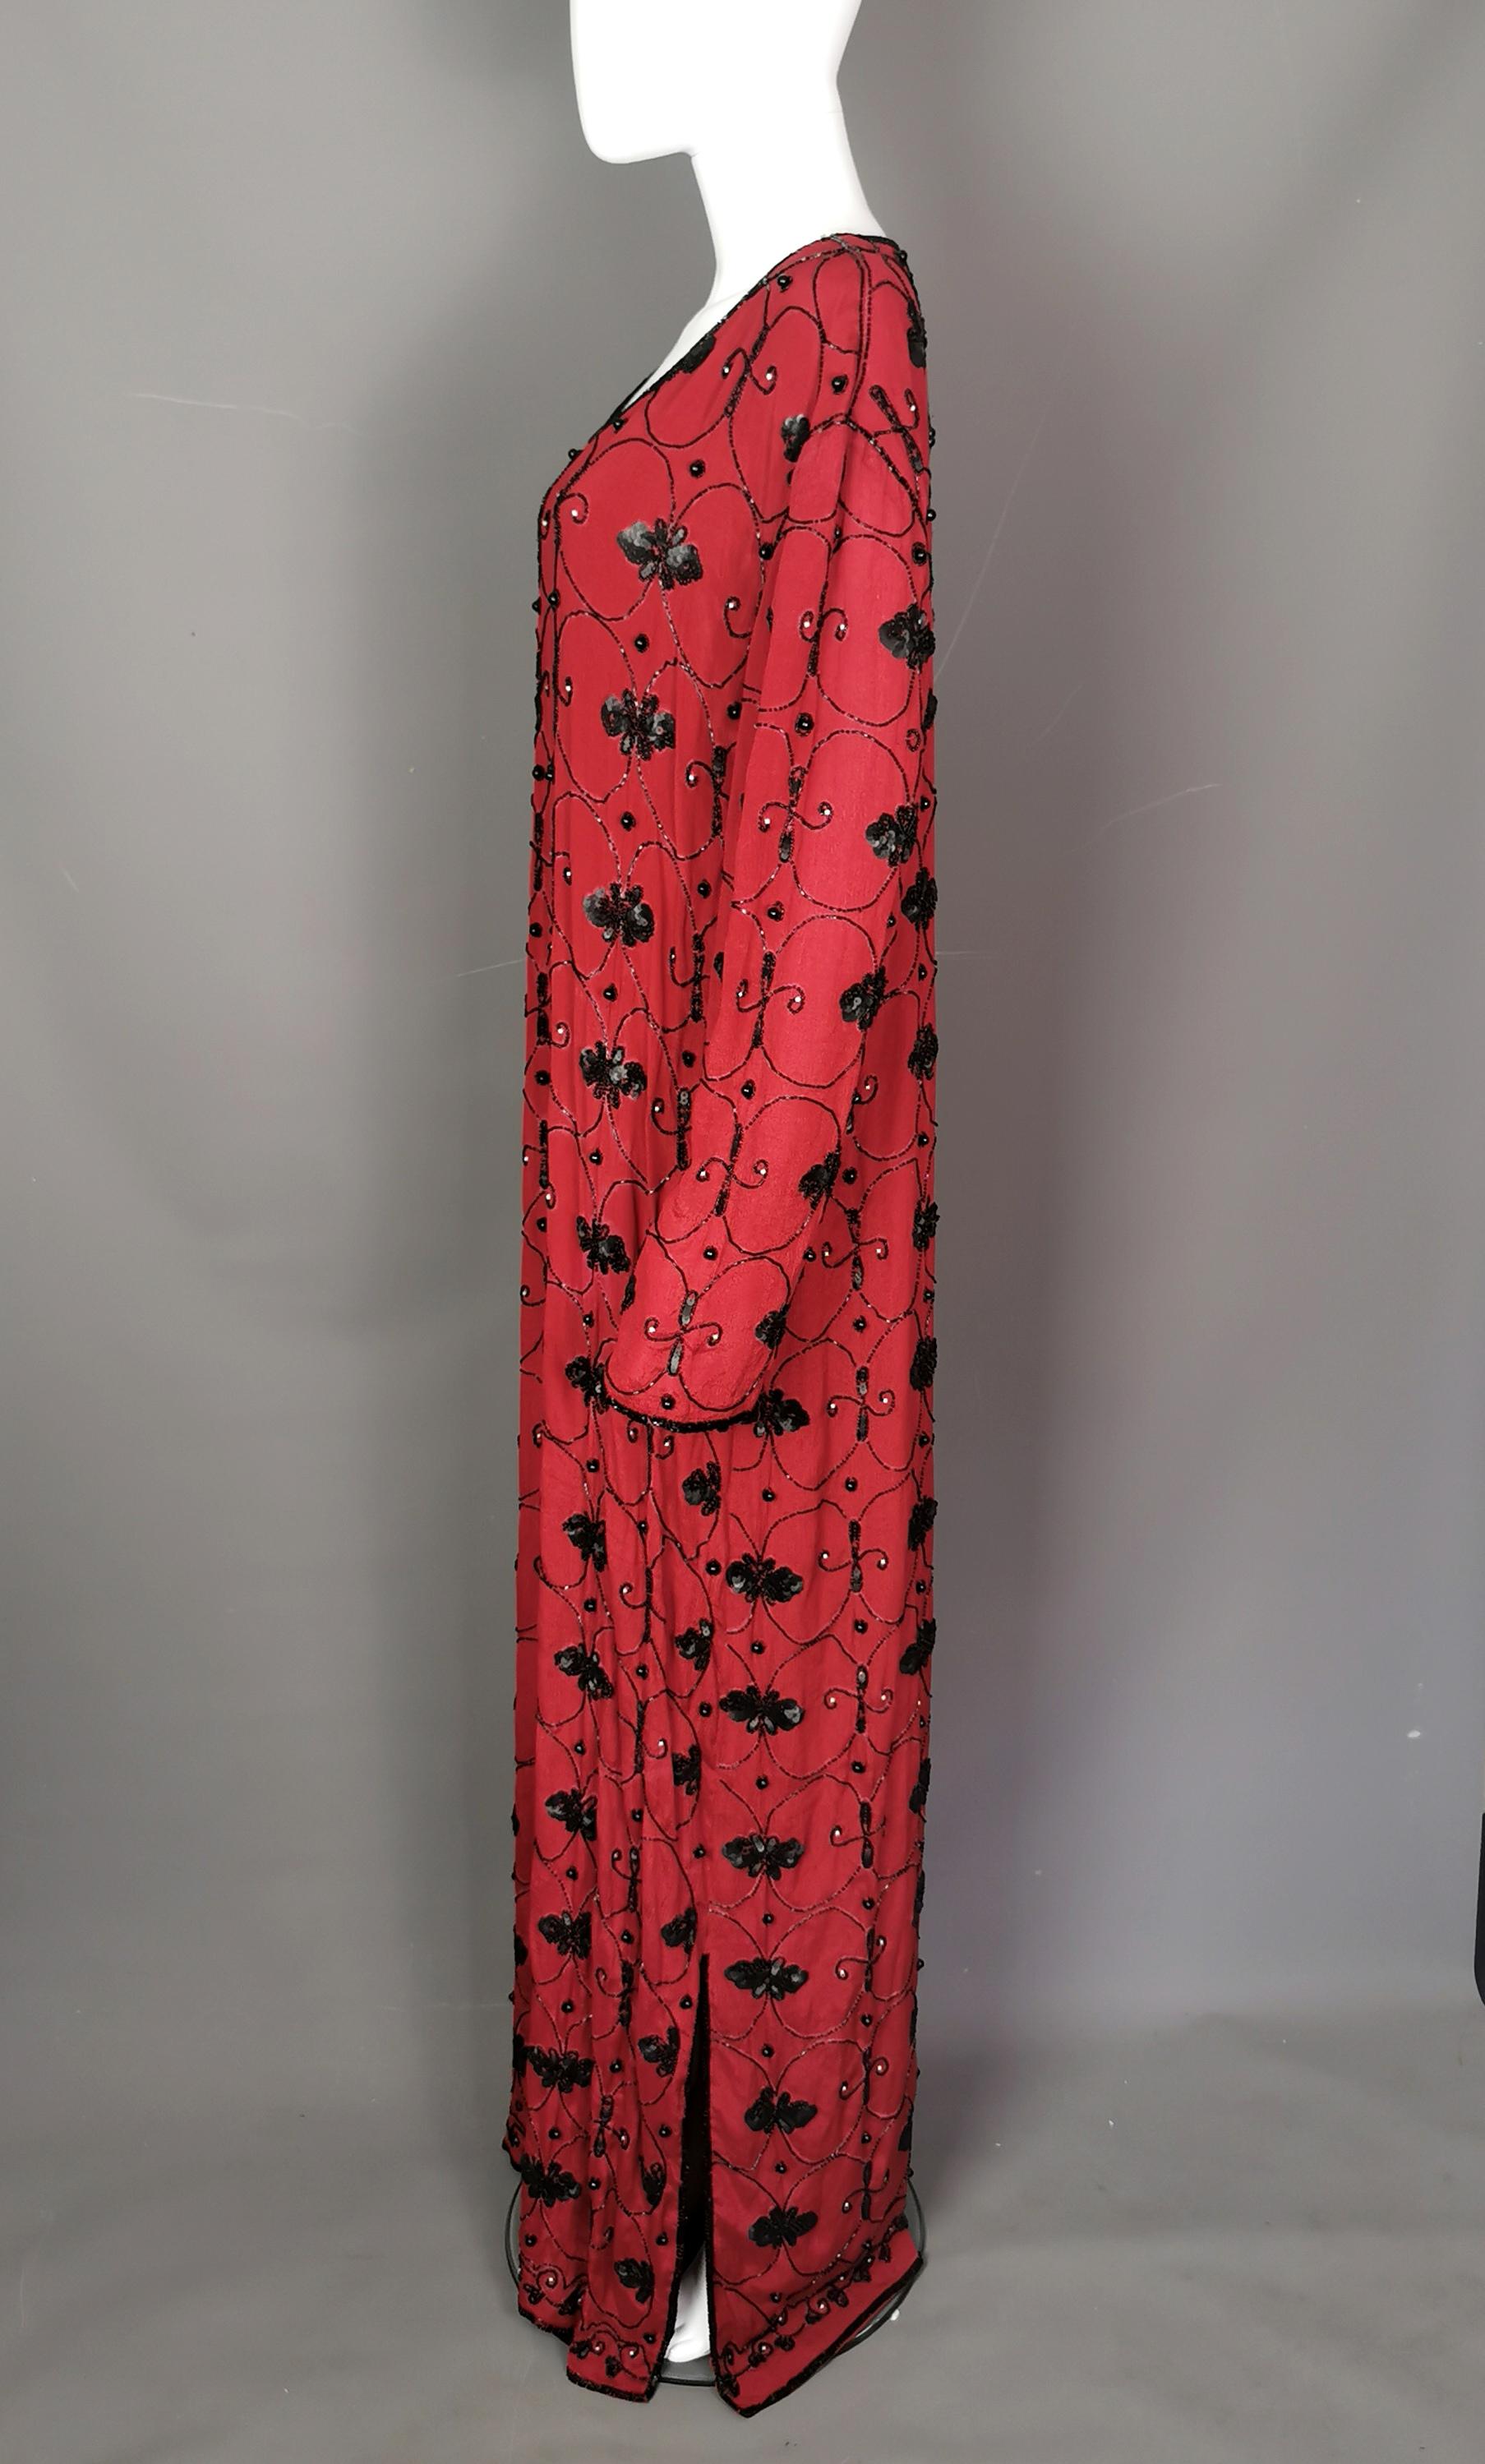 Vintage YSL Rive Gauche beaded sequin maxi dress, Red crepe silk  For Sale 1